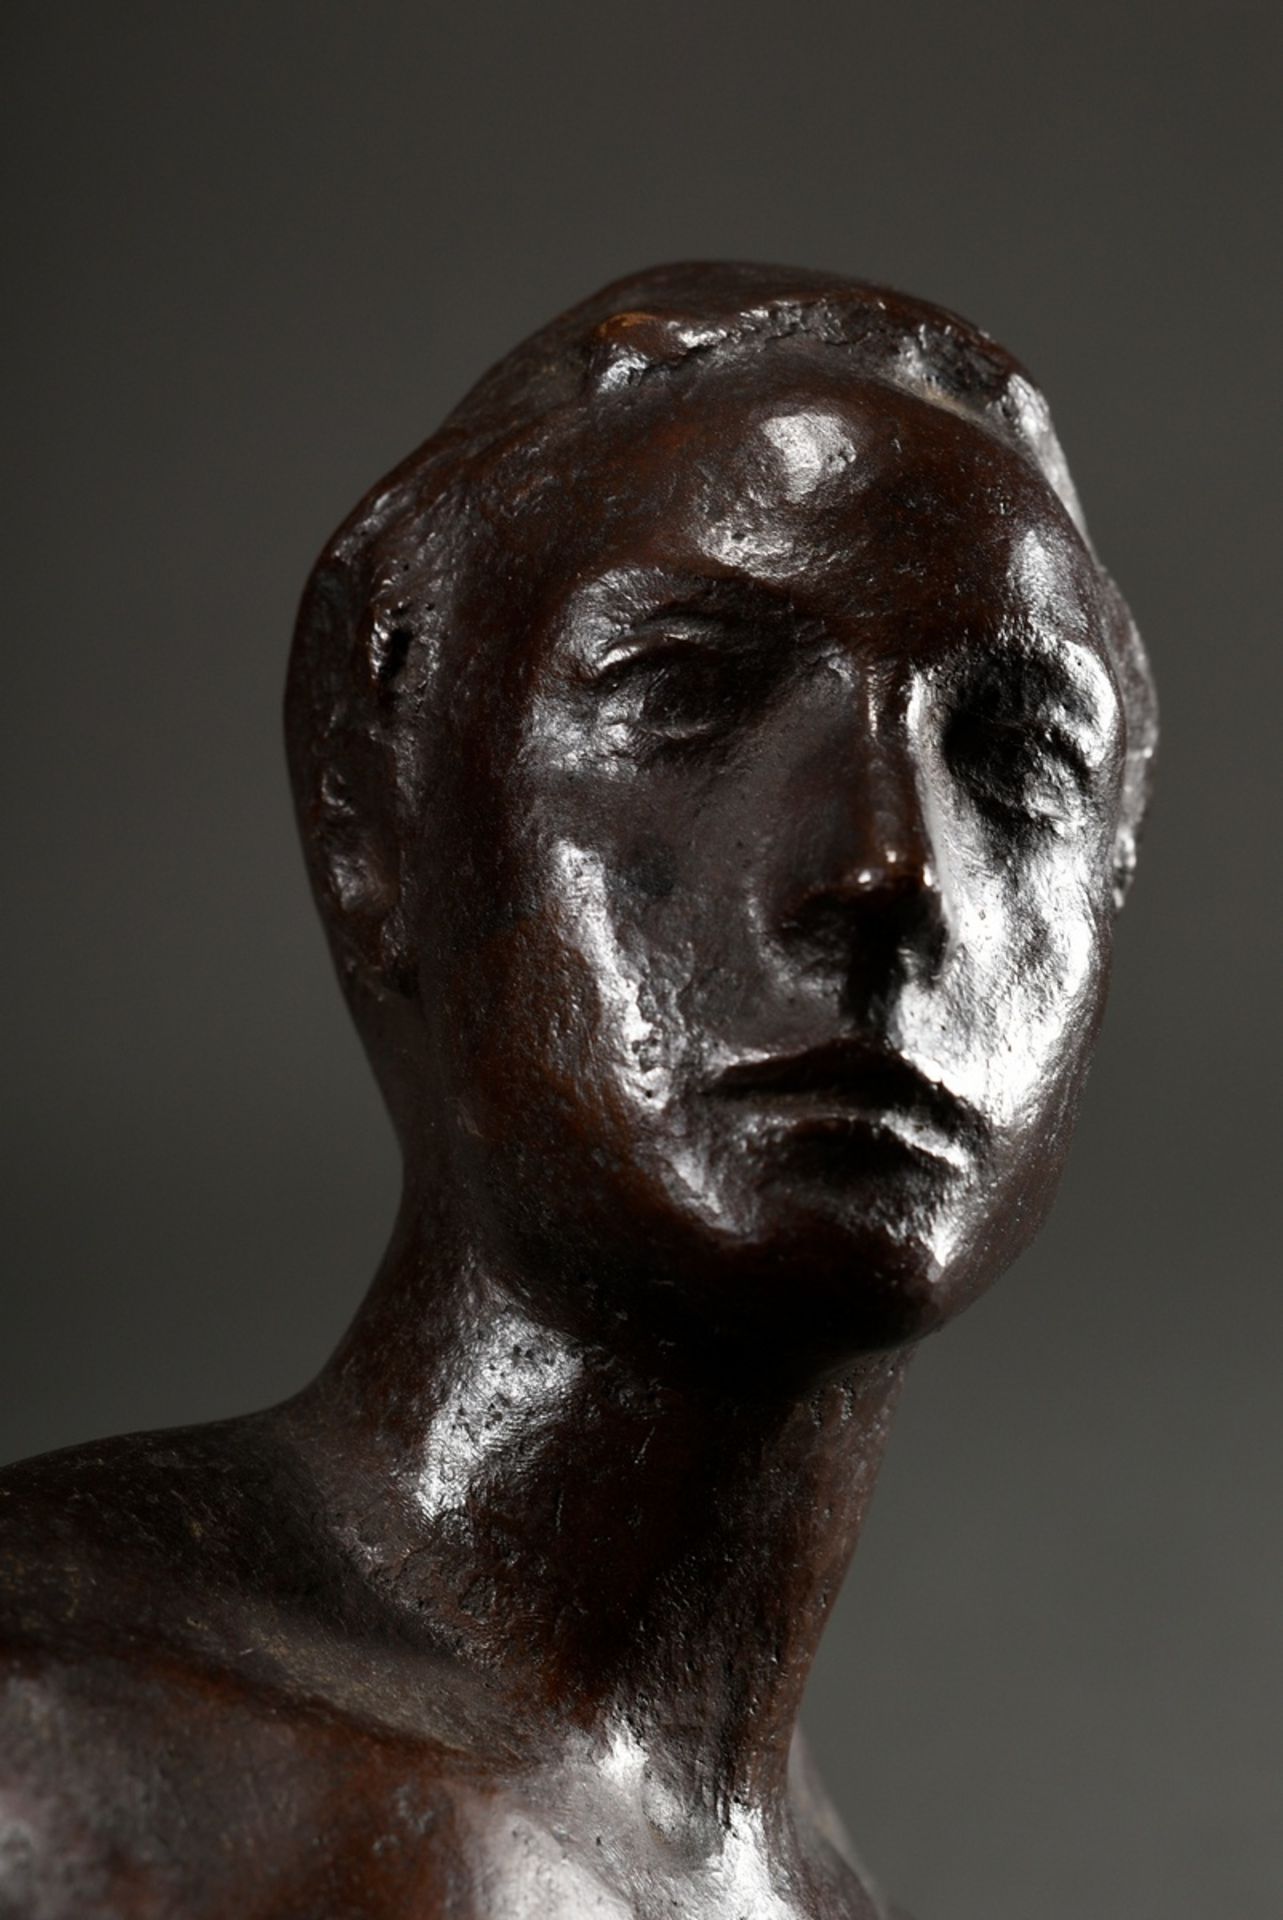 Scheibe, Richard (1879-1964) "Ascending" 1945, bronze, dark patina, with marble base, sign. on the  - Image 6 of 11